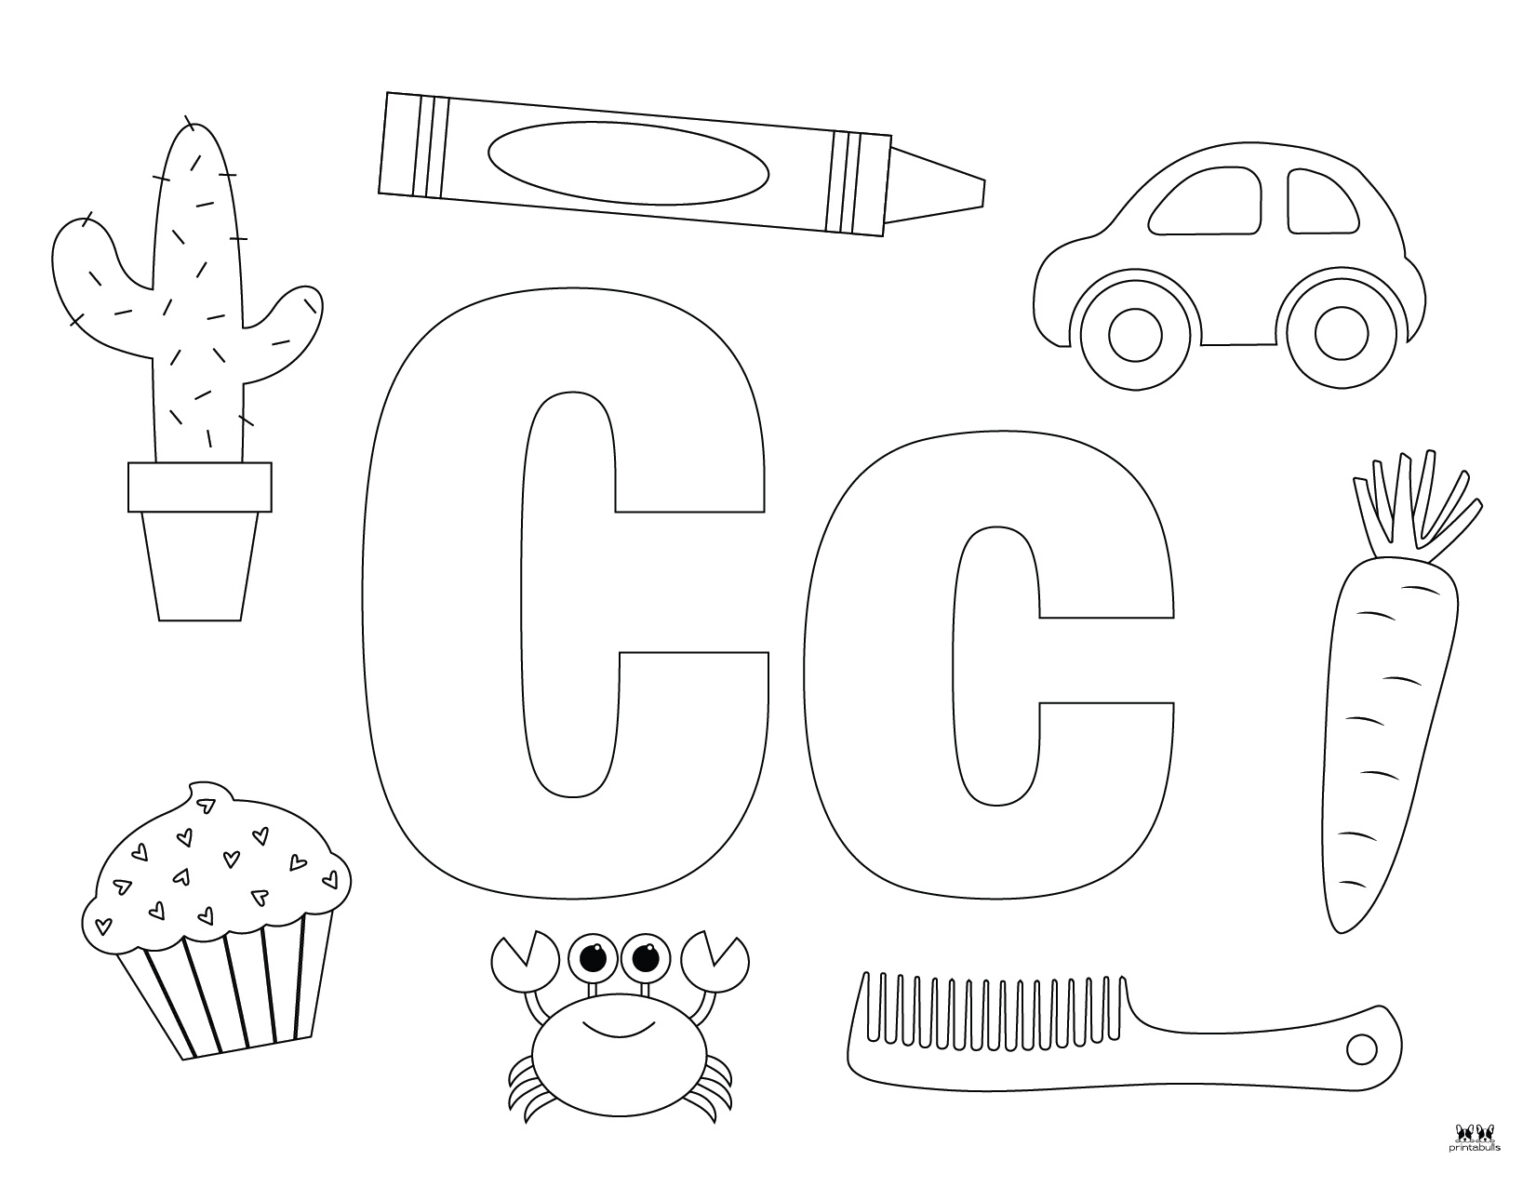 letter-c-coloring-pages-15-free-pages-printabulk